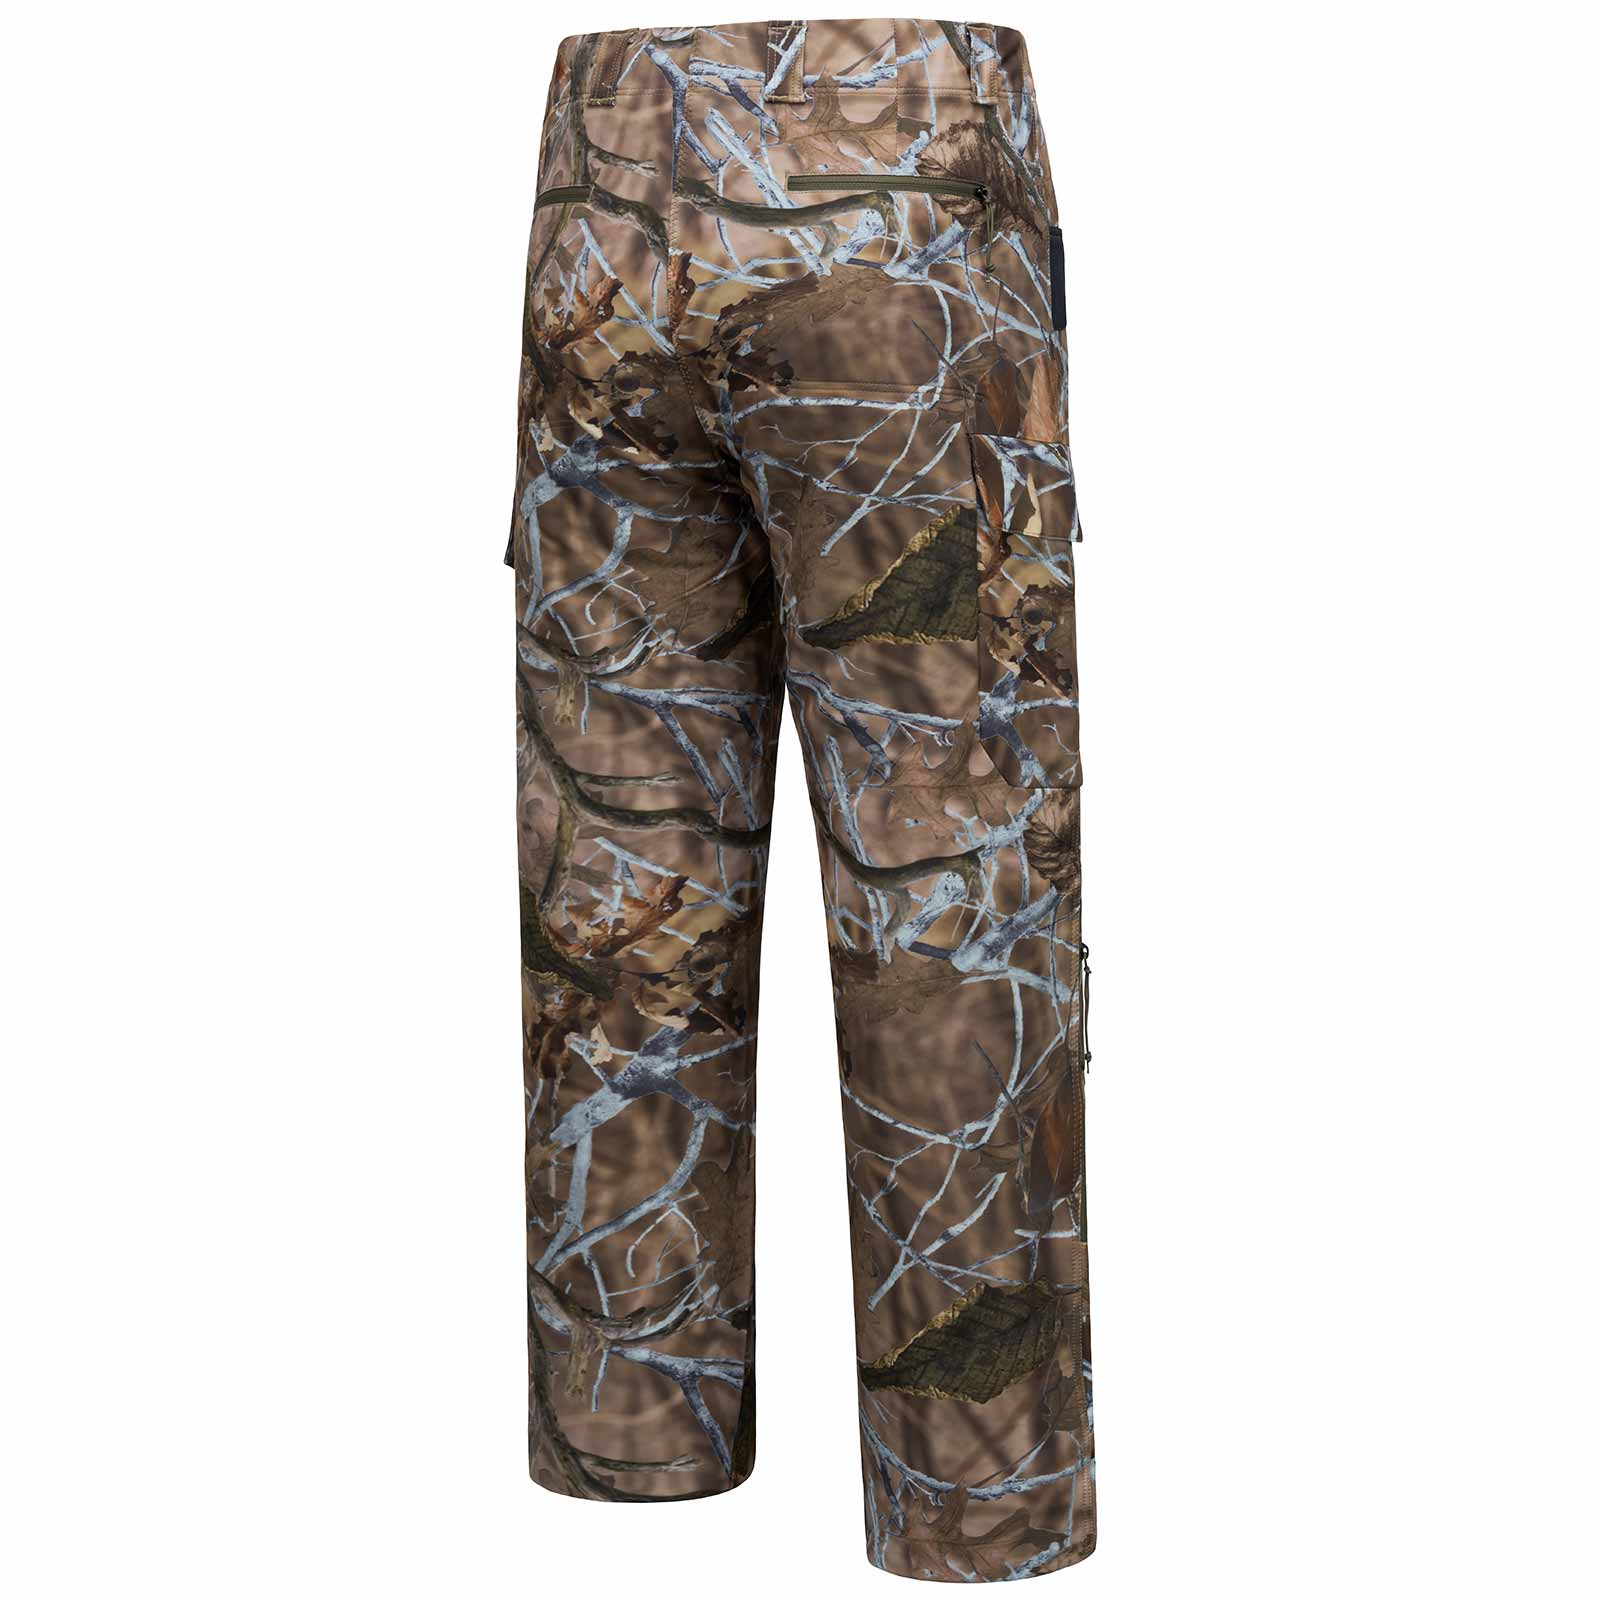 Men’s Invis Stretch Hunting Pants, Autumn Forest / 36W x 32L